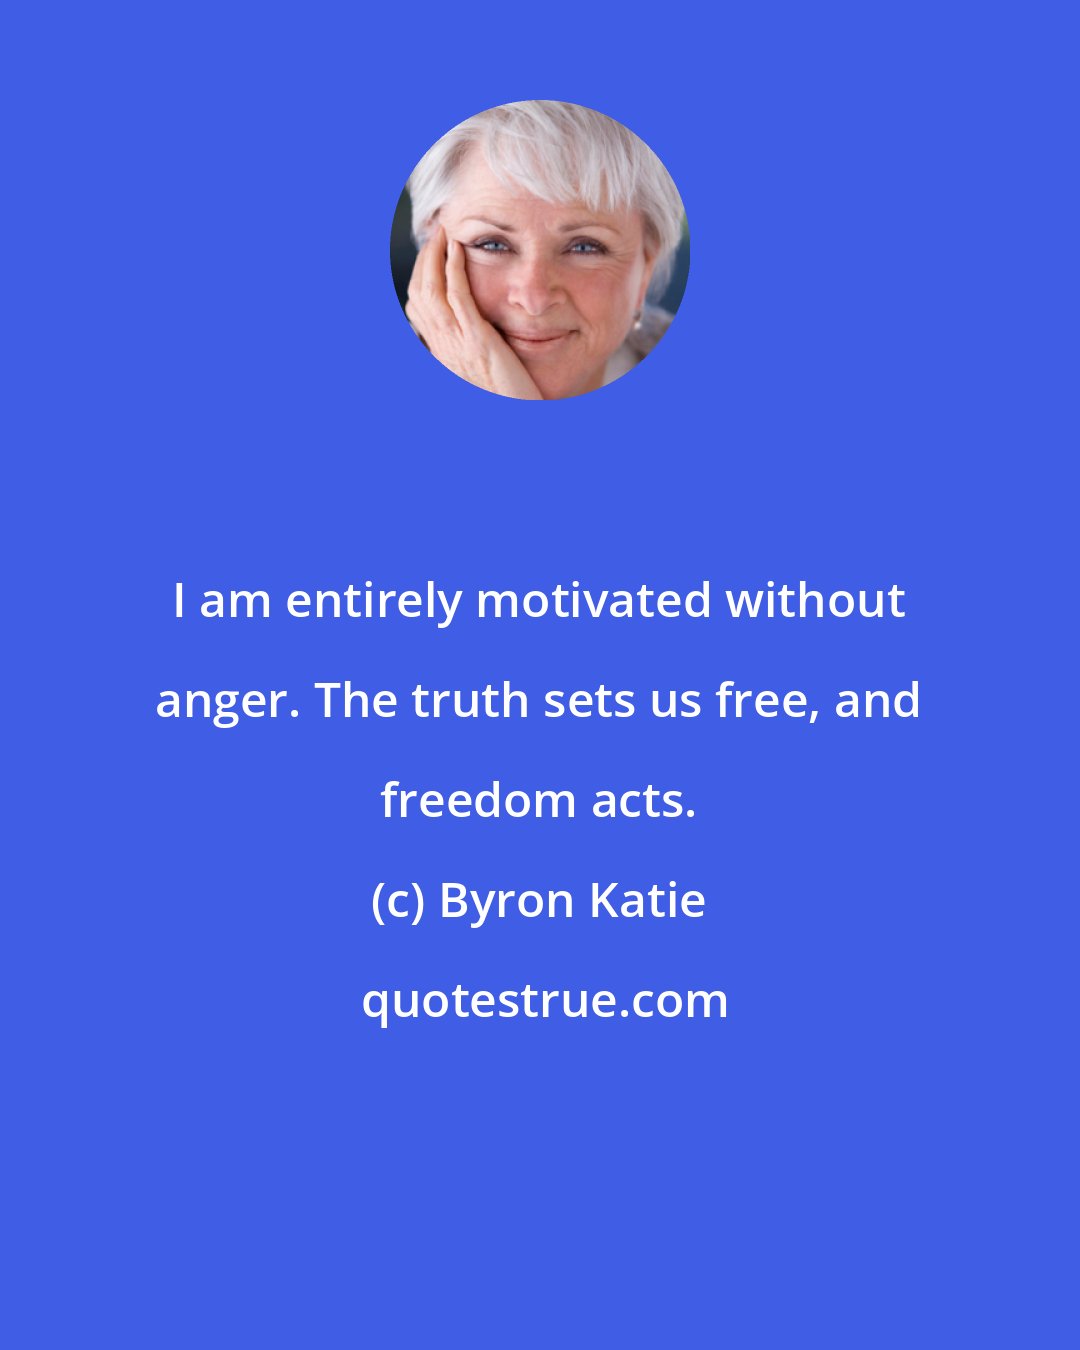 Byron Katie: I am entirely motivated without anger. The truth sets us free, and freedom acts.